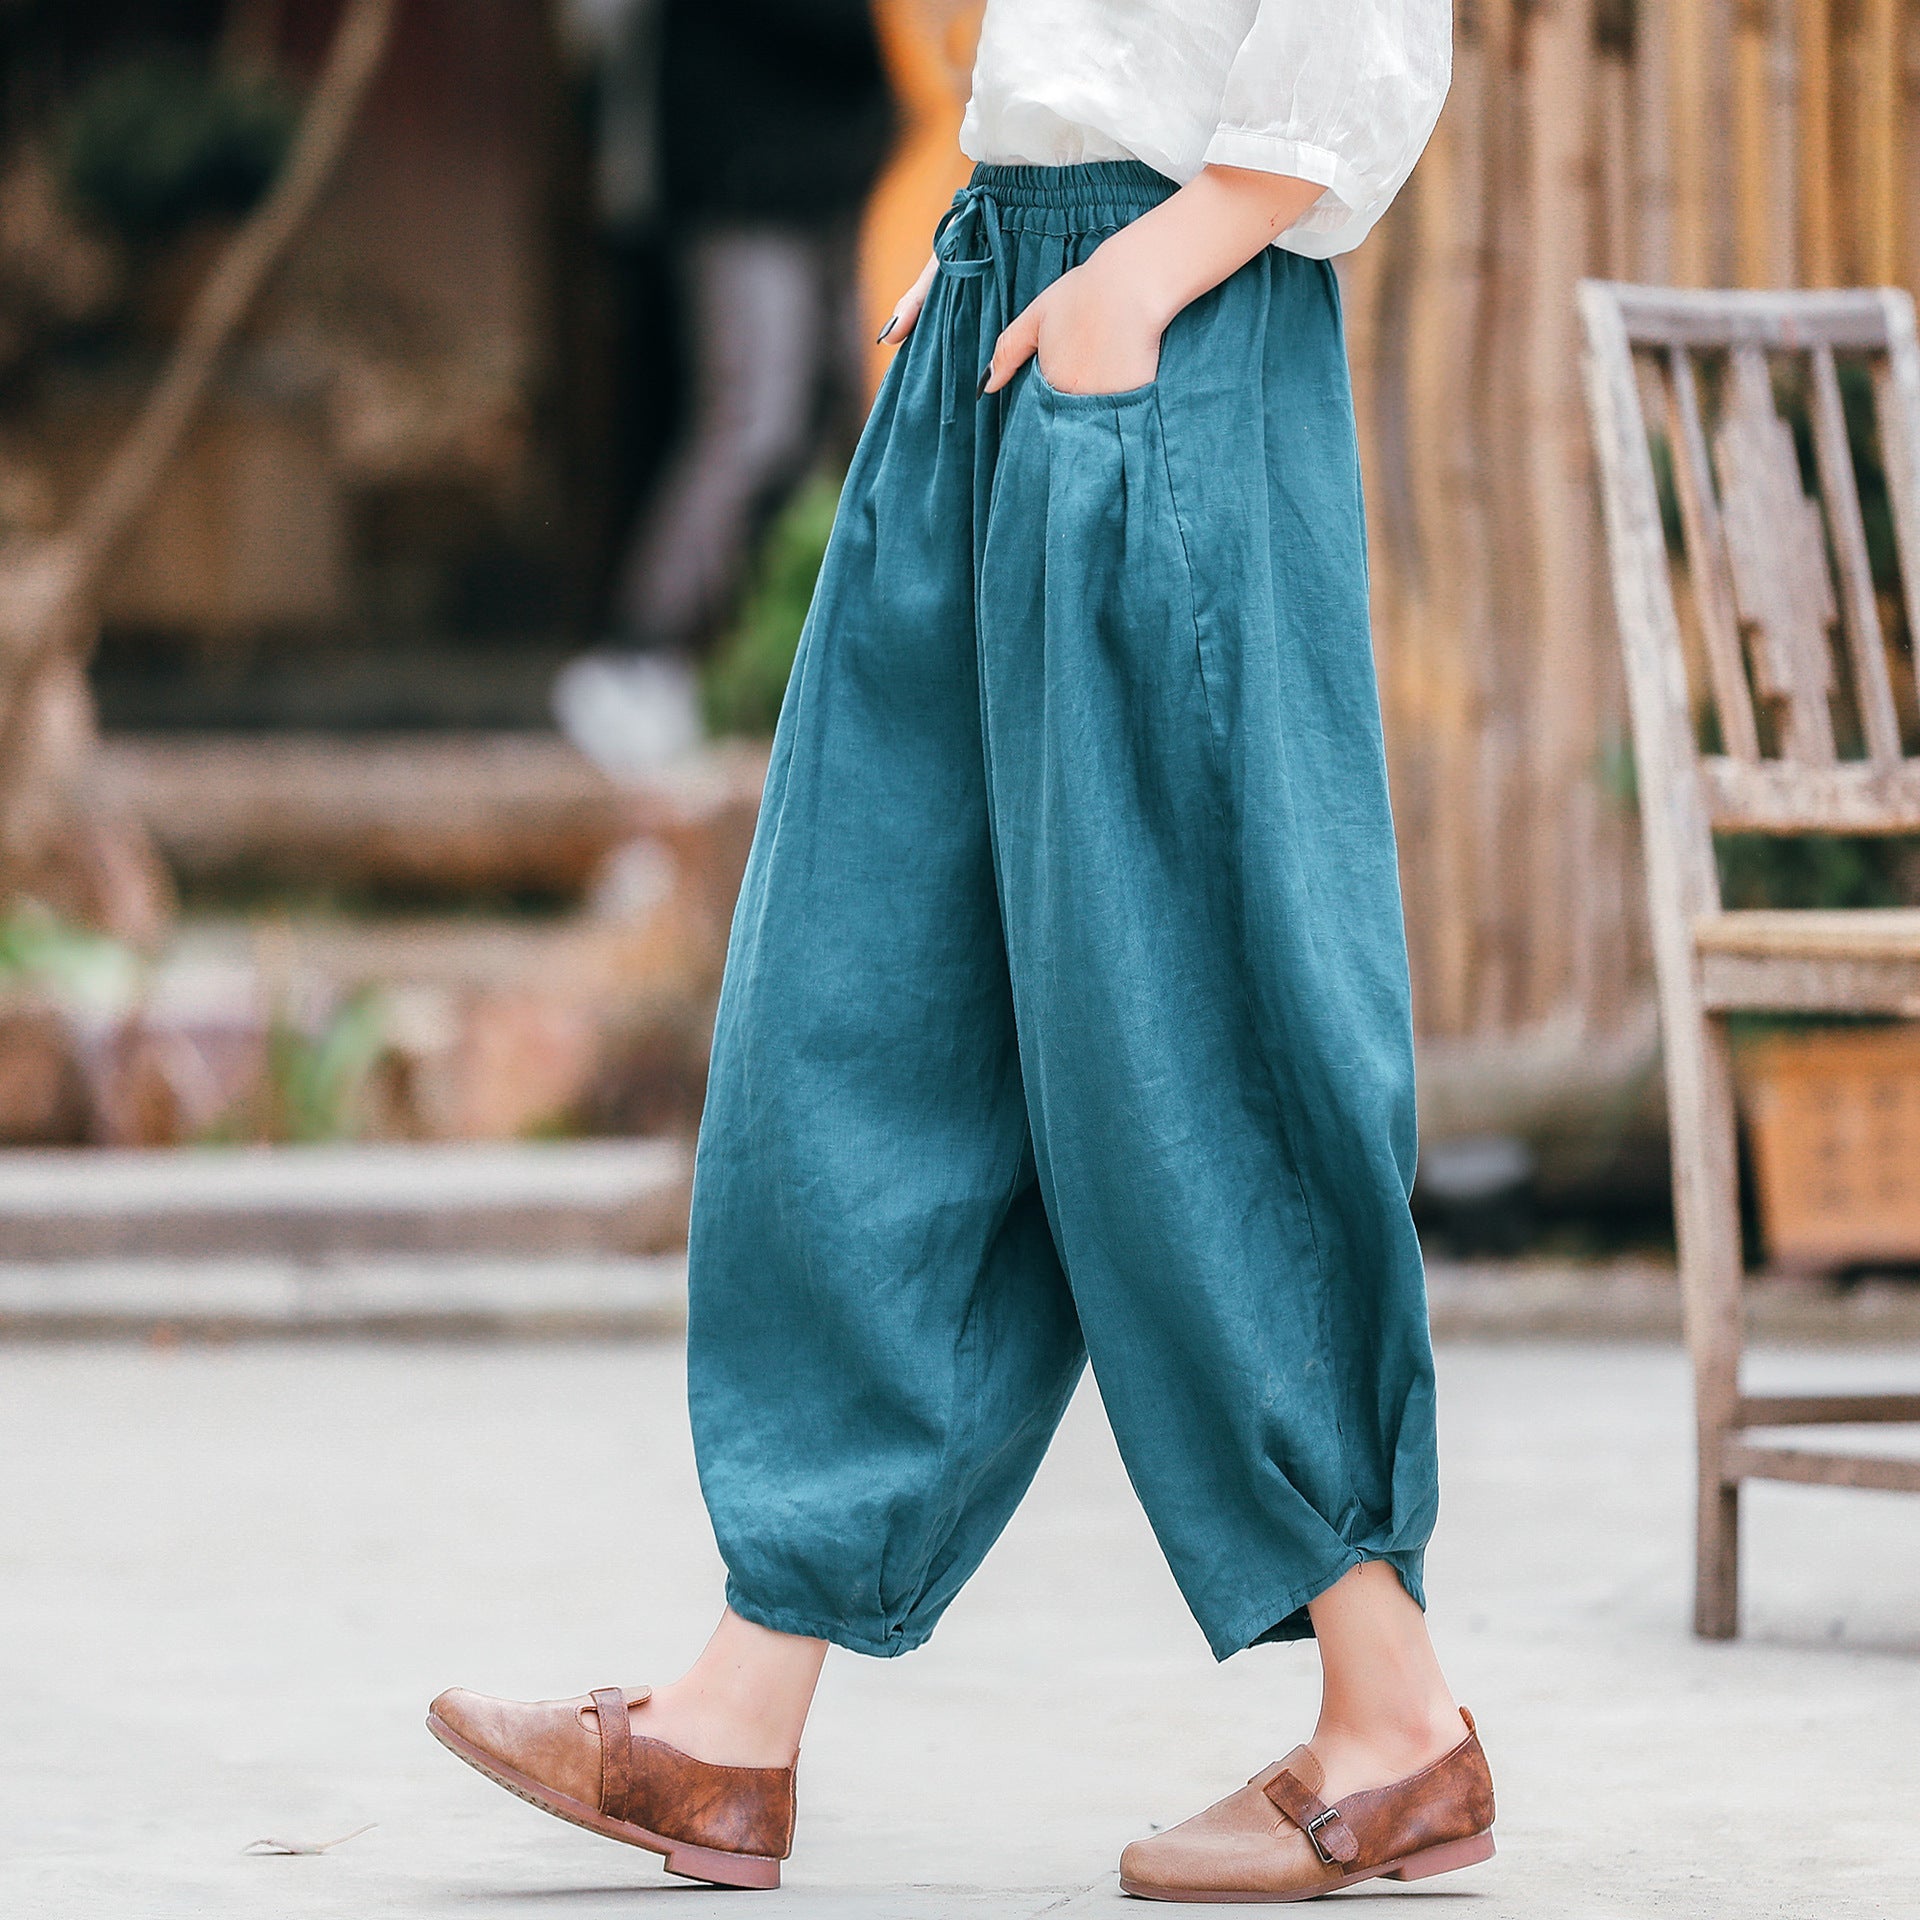 Ethnic Linen Elastic Waist Casual Pants for Women-Pants-White-One Size 45-65kg-Free Shipping Leatheretro